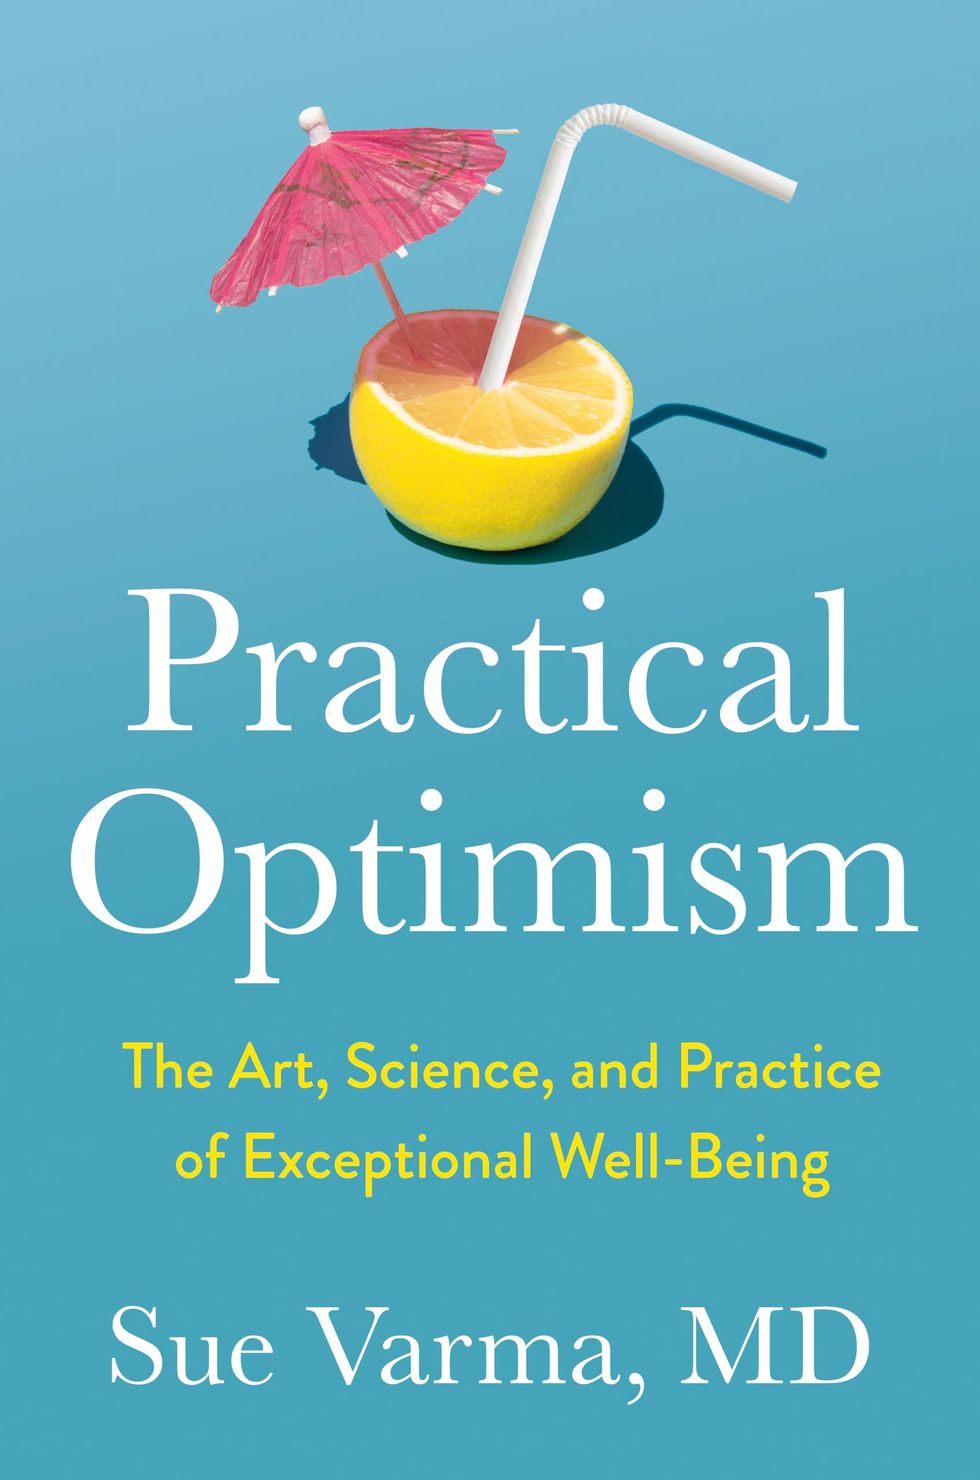 Practical Optimism: The Art, Science, and Practice of Exceptional Well-Being